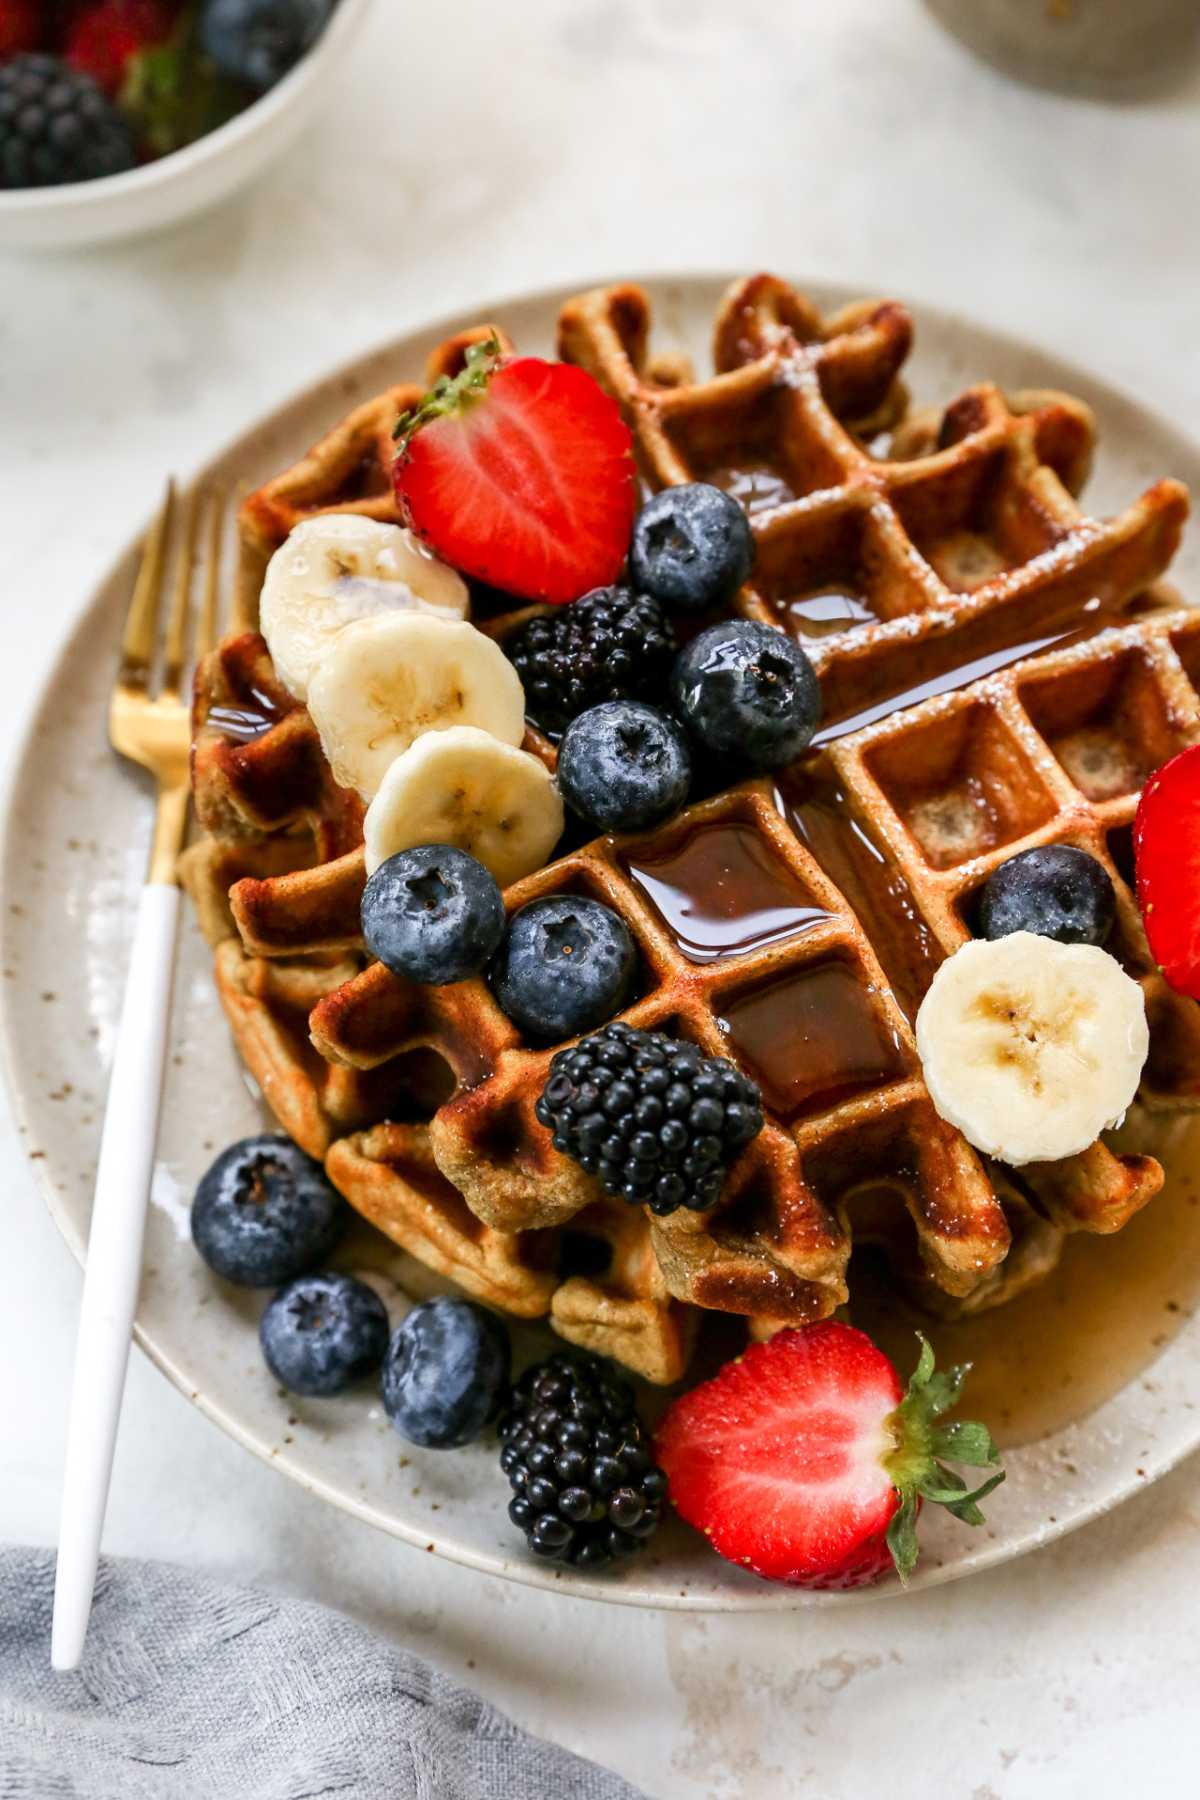 Waffle topped with maple syrup, berries and sliced banana.